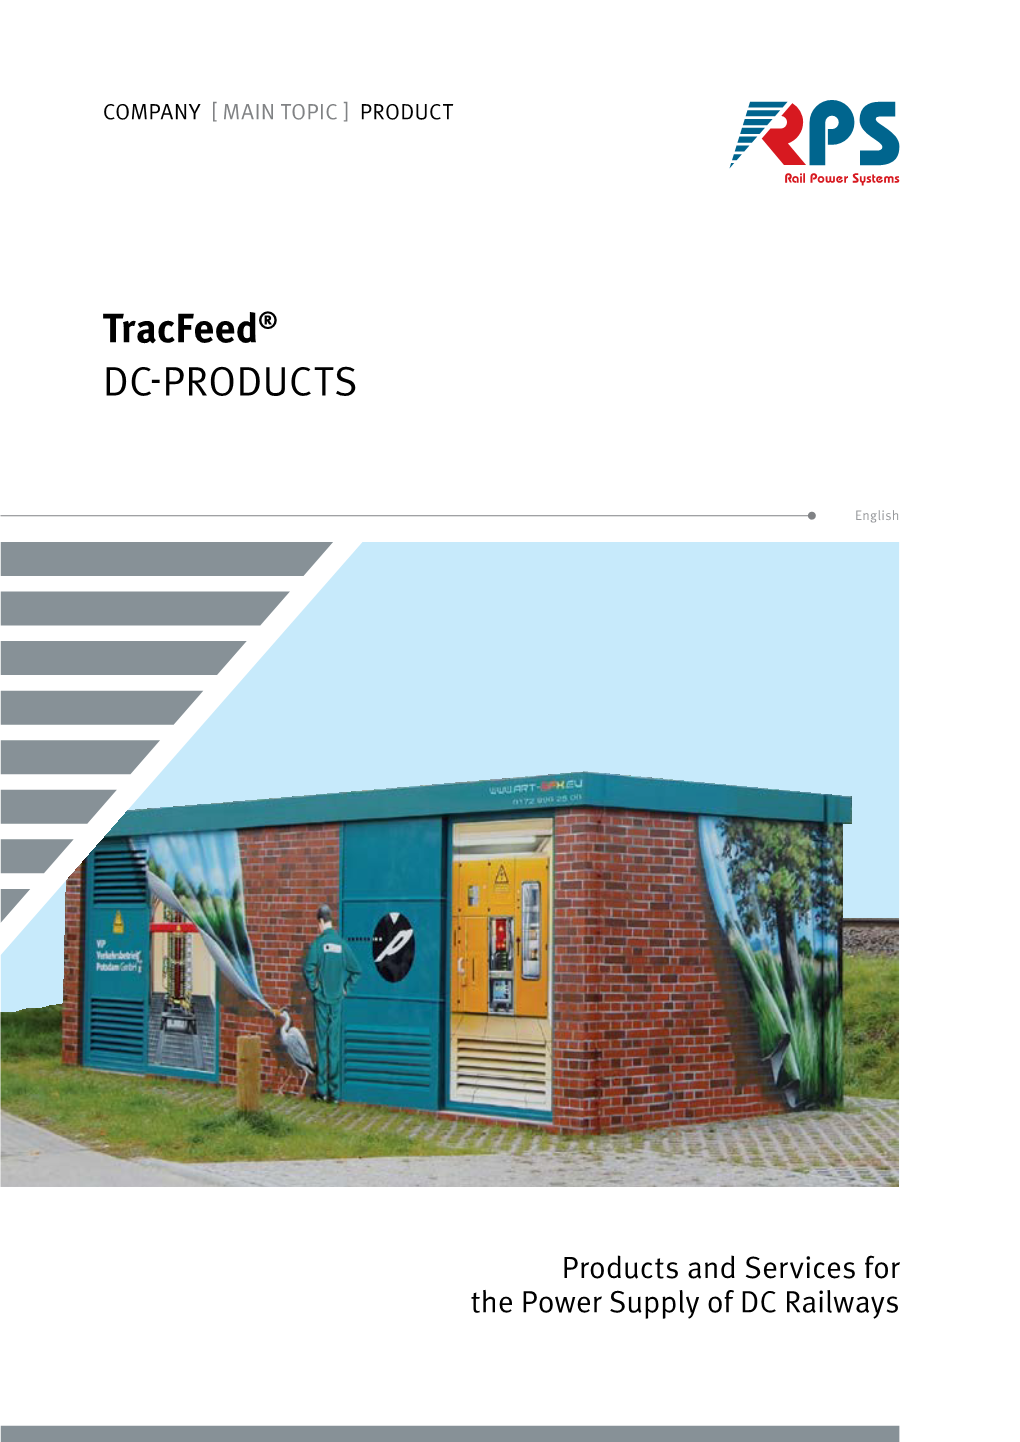 Tracfeed® DC-PRODUCTS